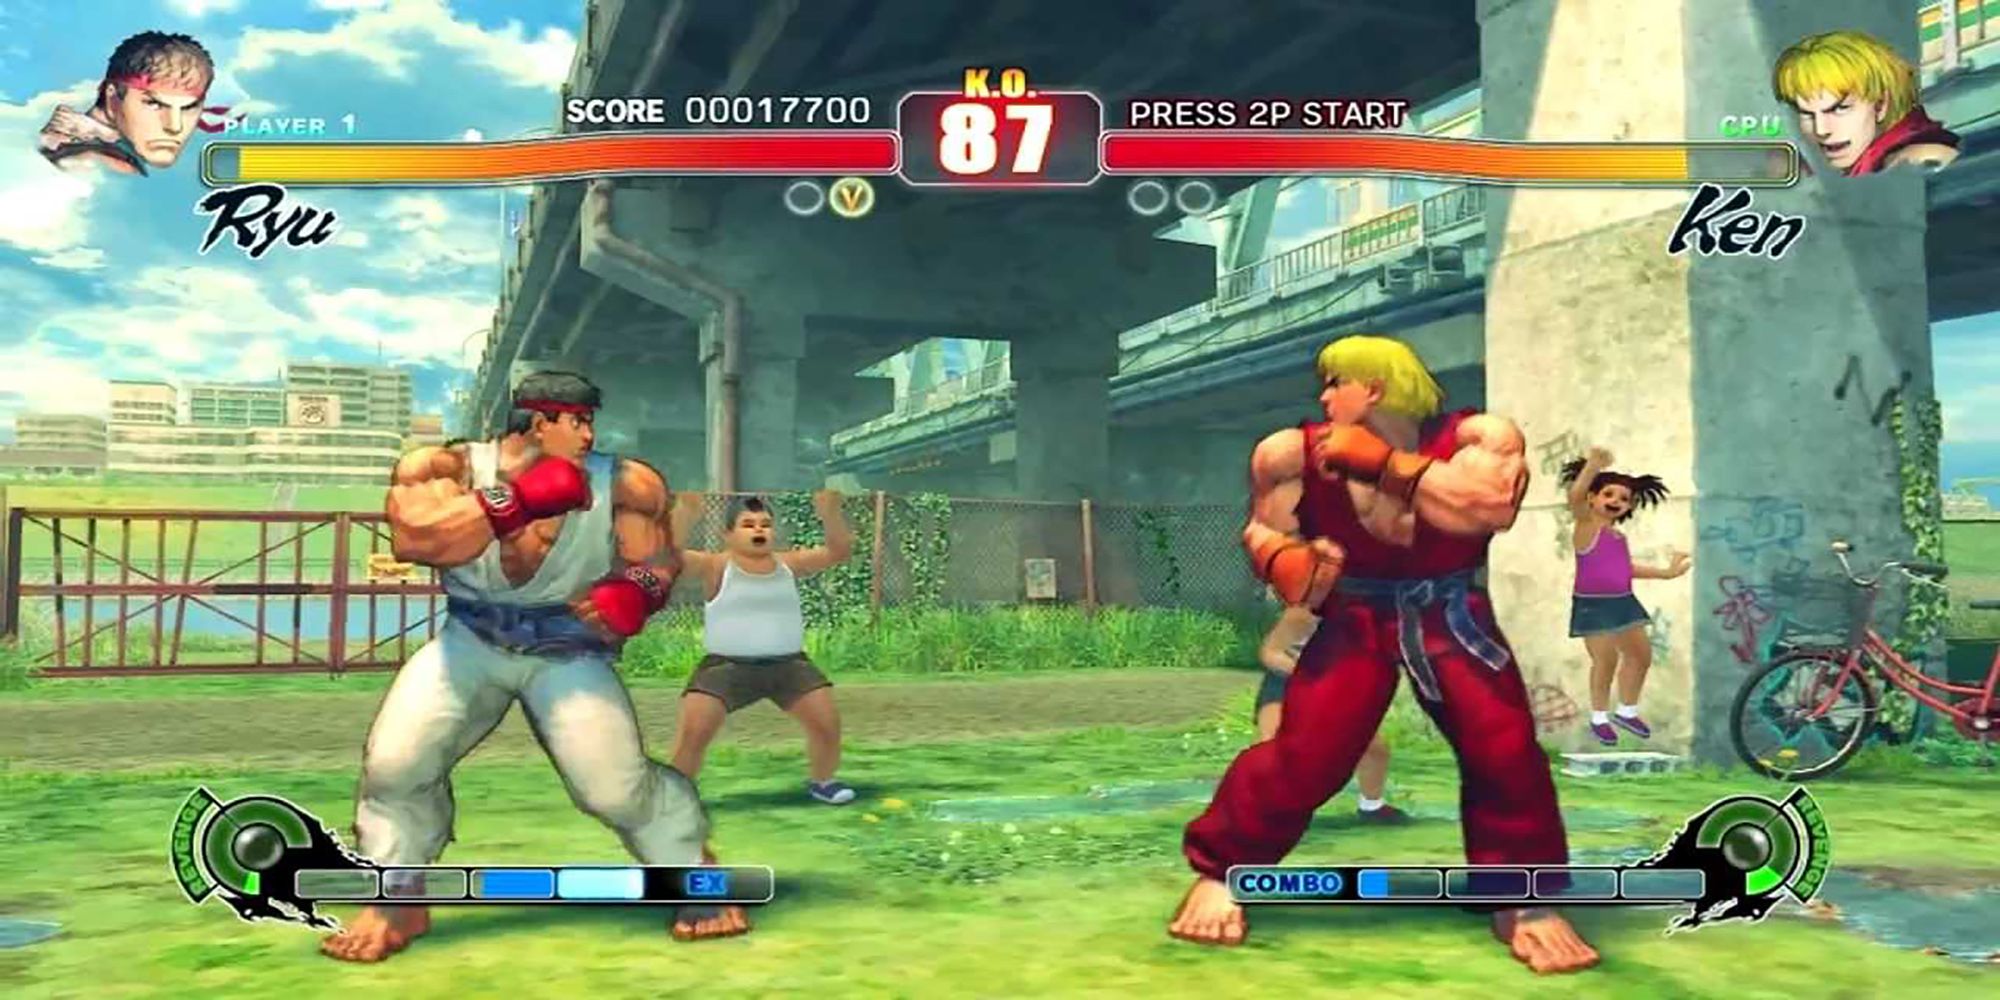 Ryu and Ken face off in a match under an overpass in Street Fighter 4.